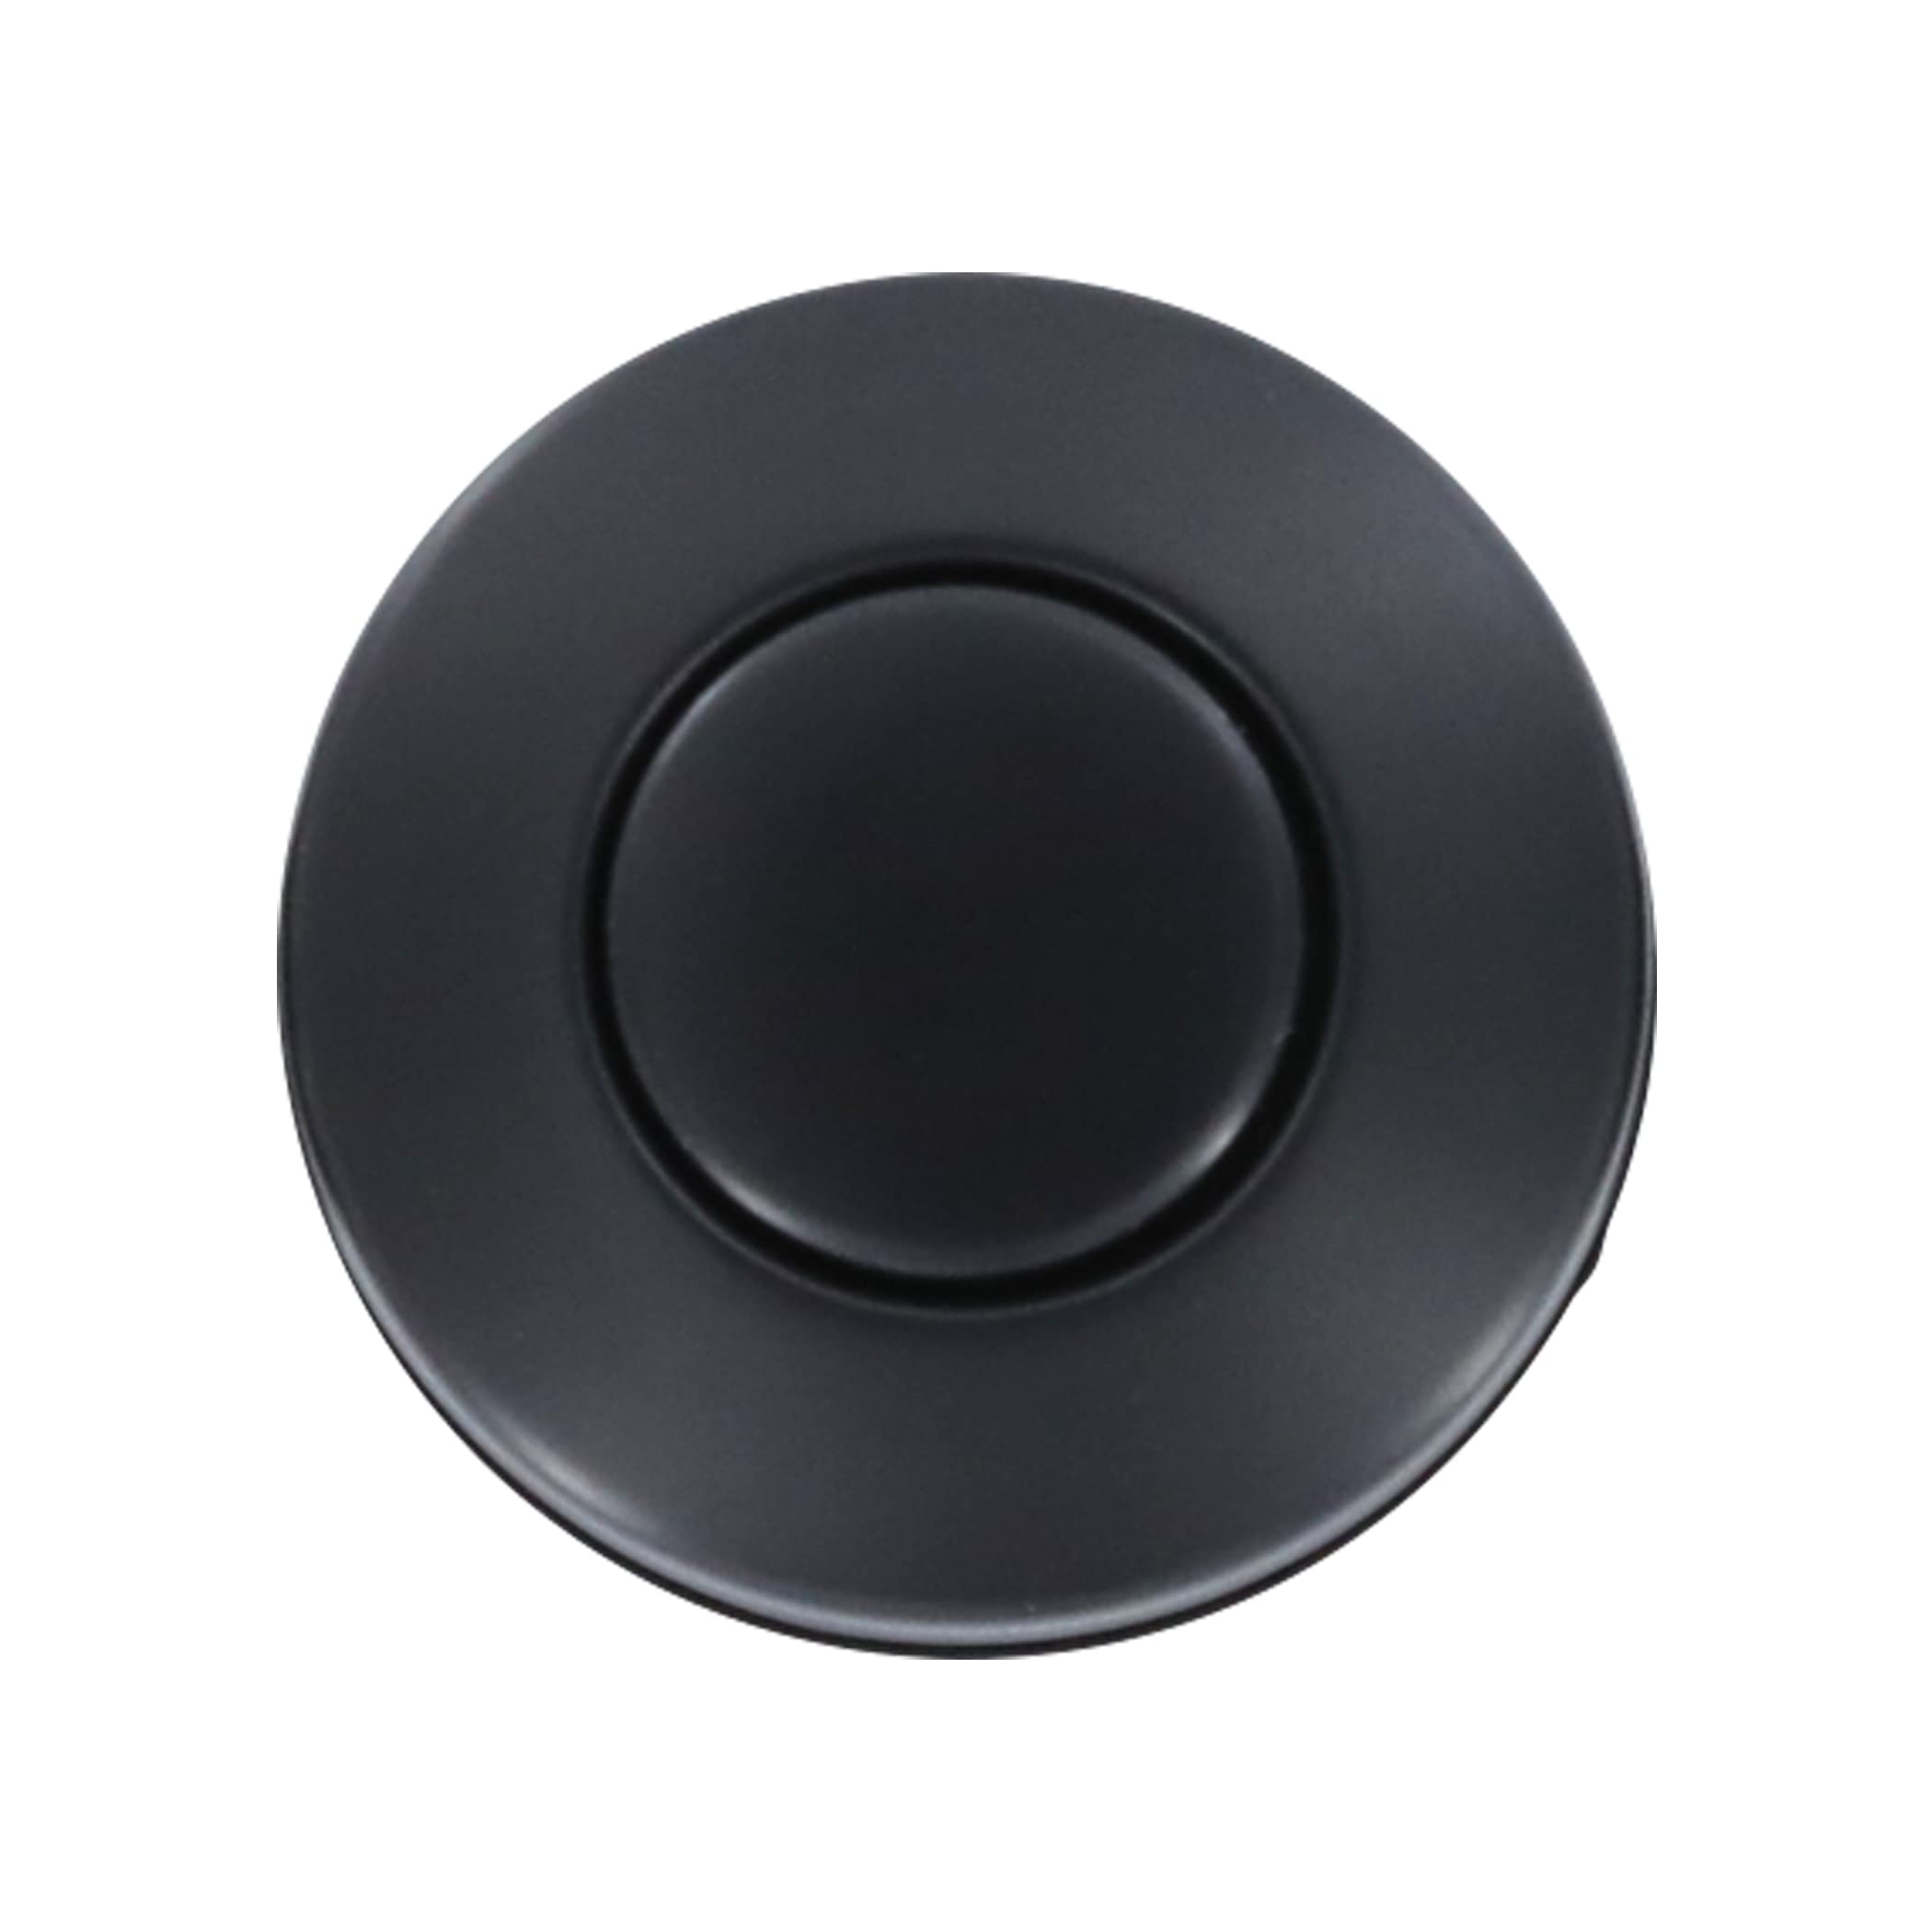 Danco 12067 Sink Top Mount Air Switch Replacement Button, Matte Black